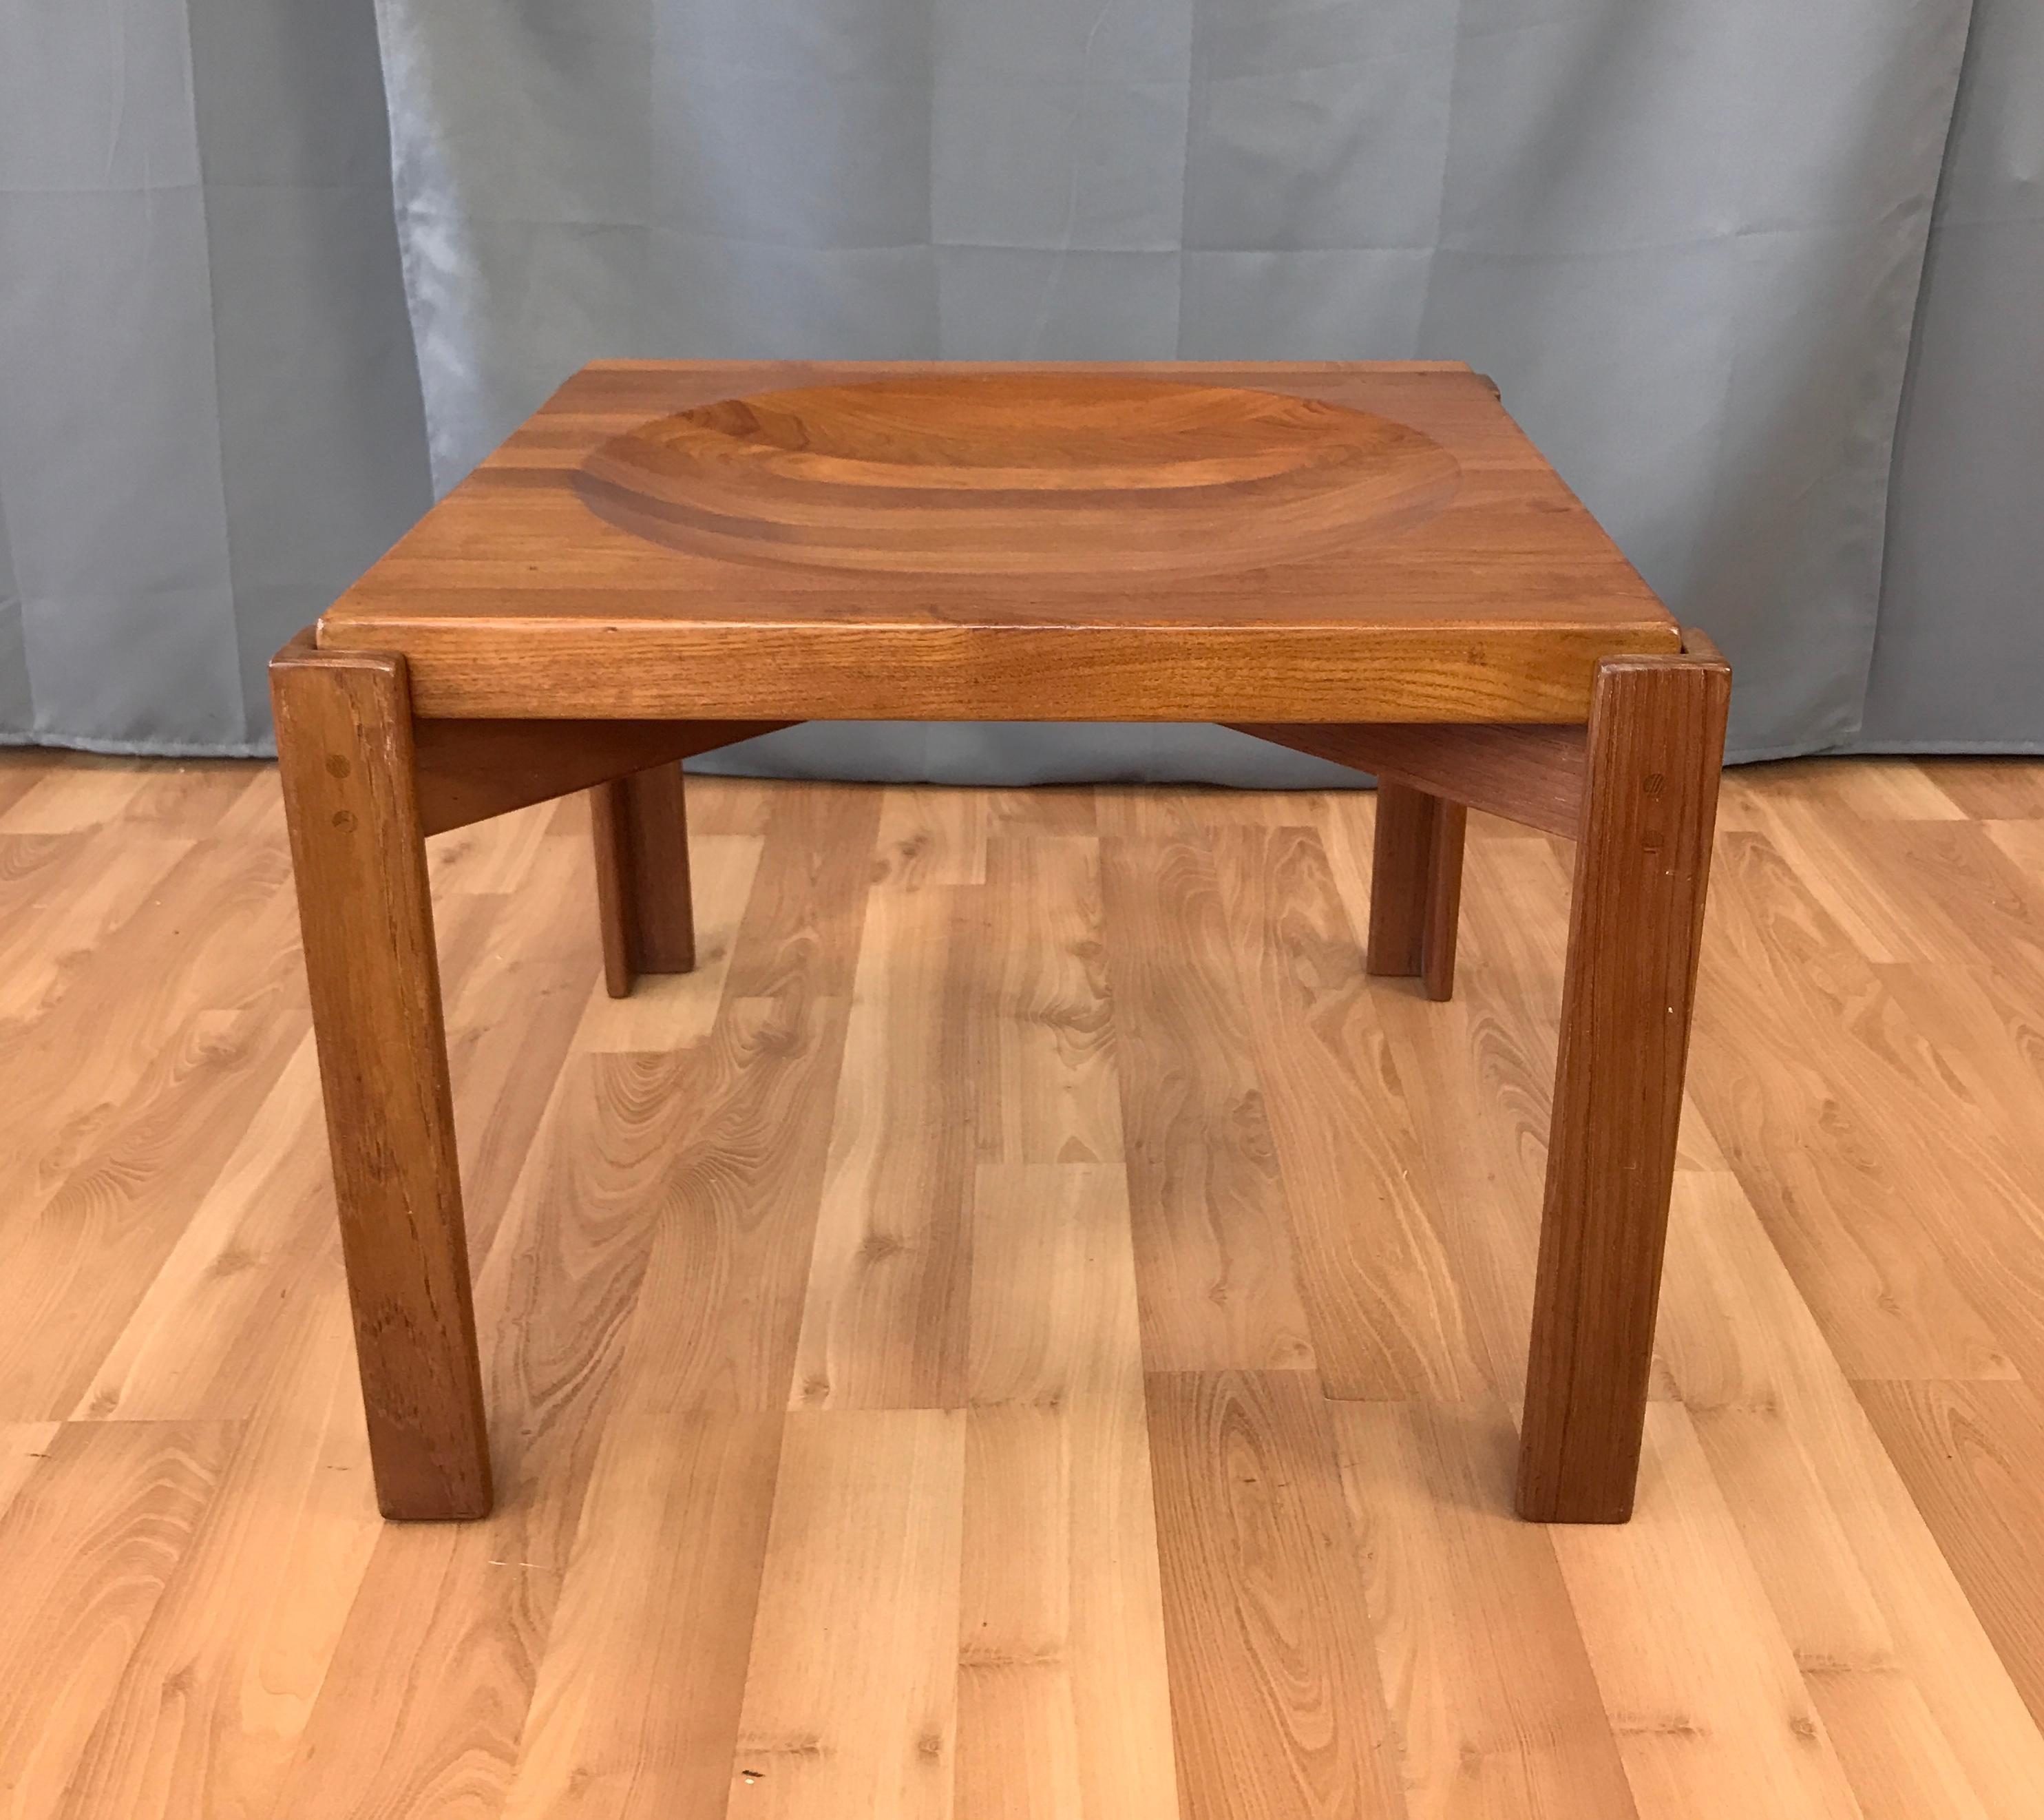 A solid Teak end table w/reversible butcher block top, it's been attributed to Jens Quistgaard. This one is unmarked, but we have seen them stamped made in Sweden.
When you flip the top over, from the flat side, you get the concave side.